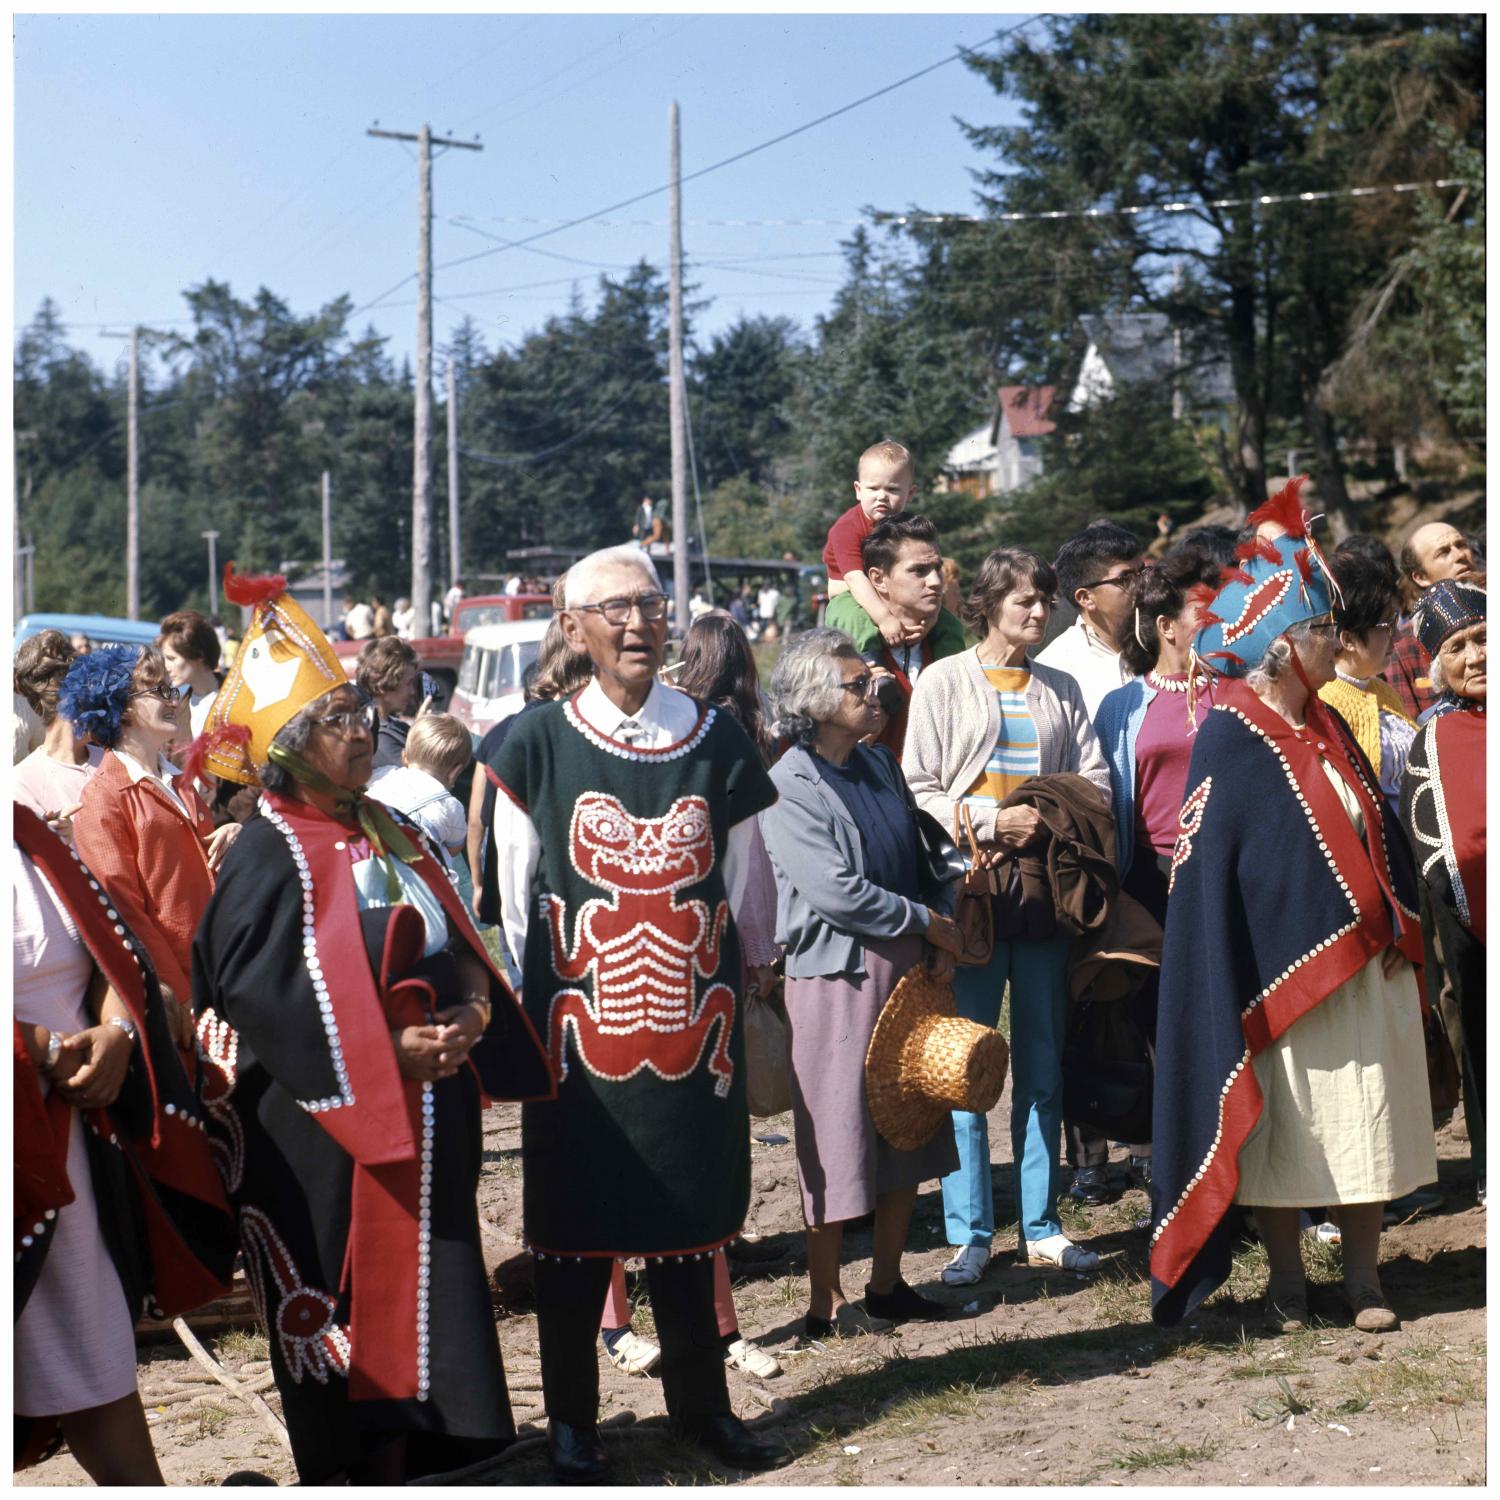 Image taken at a pole raising ceremony in Masset. The pole was carved by Robert Davidson, Jr. This image shows a section of the crowd gathered for the ceremony, many of whom are in what appears to be ceremonial dress.